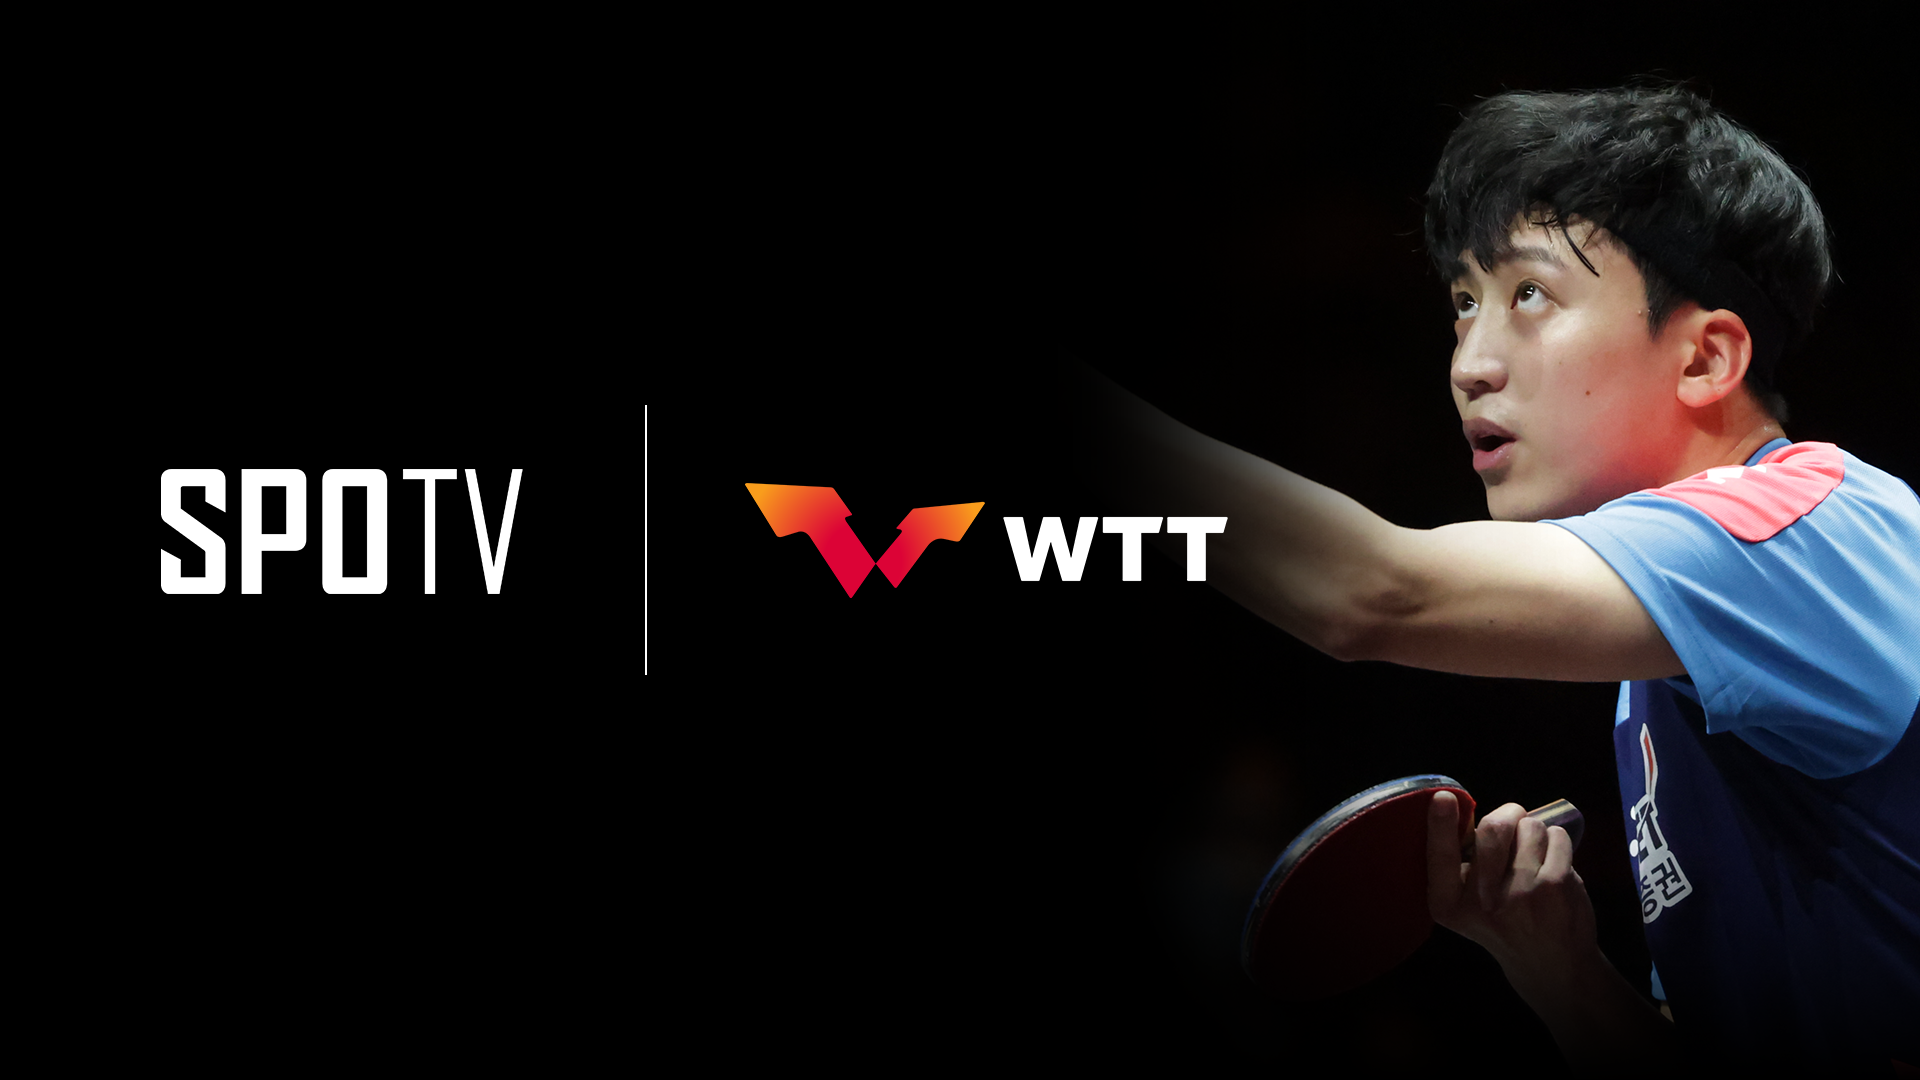 WTT Signs SEA Broadcast Deal With Eclat Media Group For SPOTV